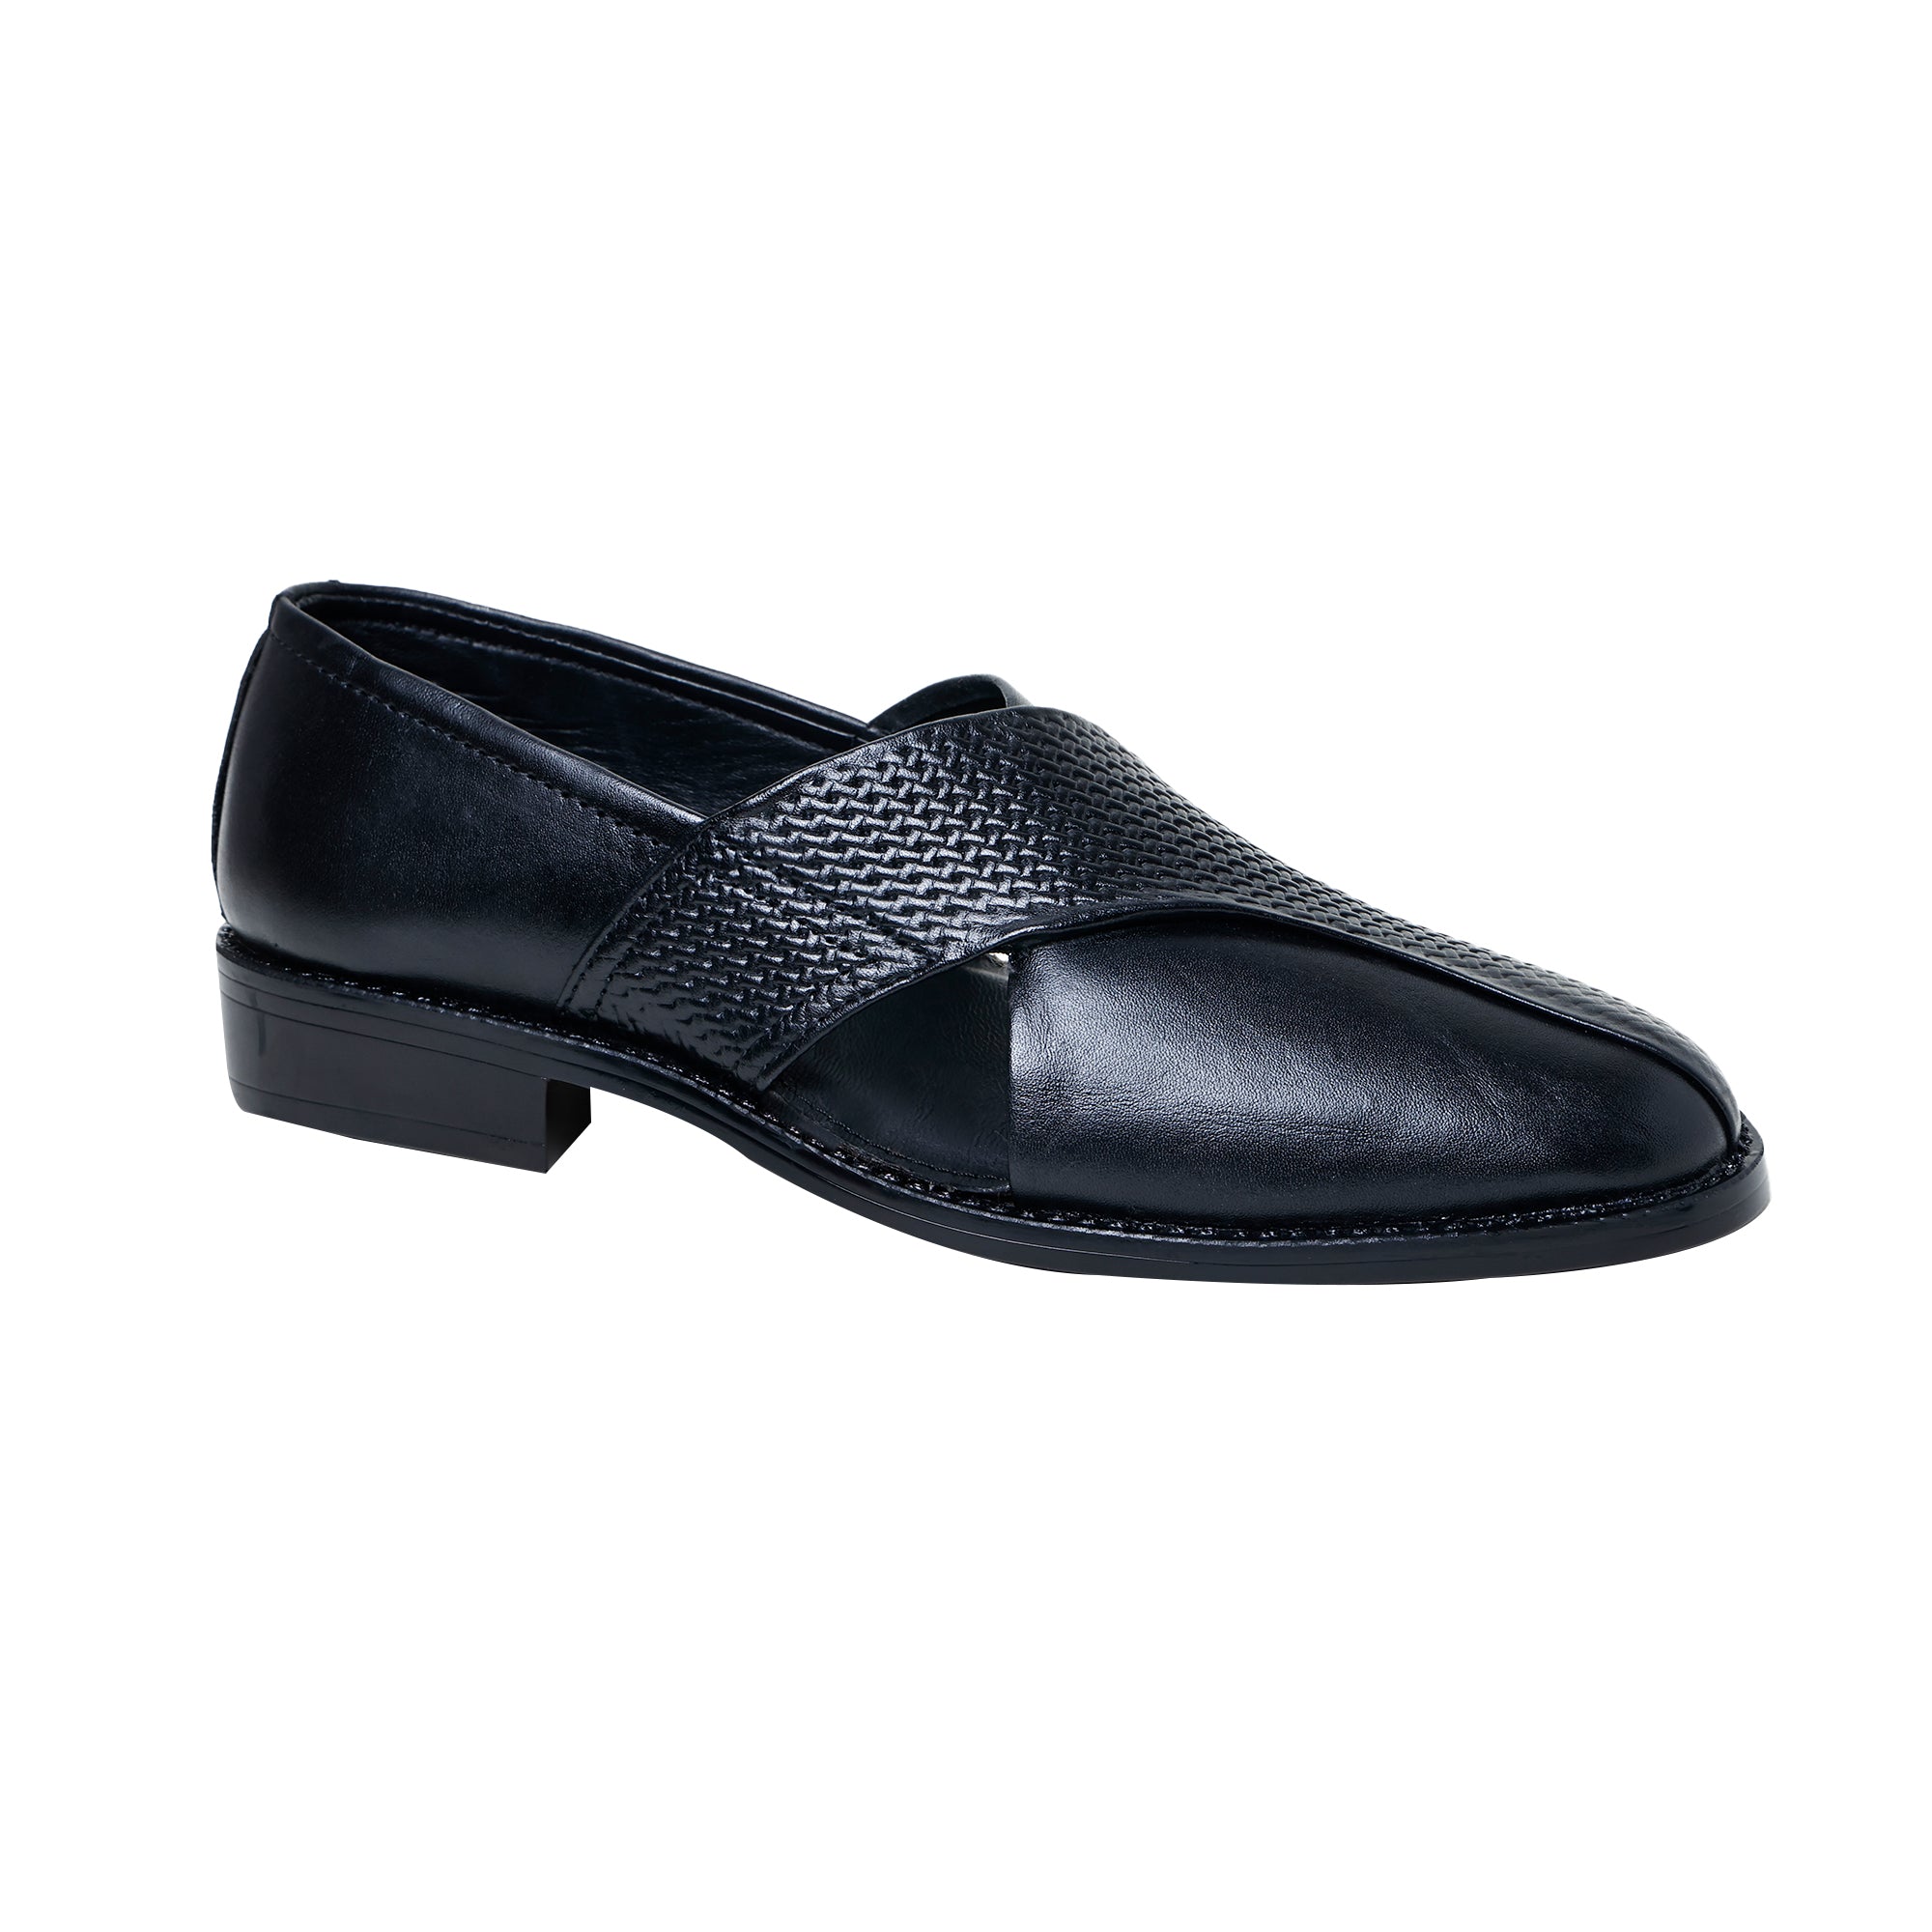 Louis Blanc Men’s Ethnic Leather Peshawari Slip On Shoes For Wedding| Party | Lightweight | PU Sole (LB17A)